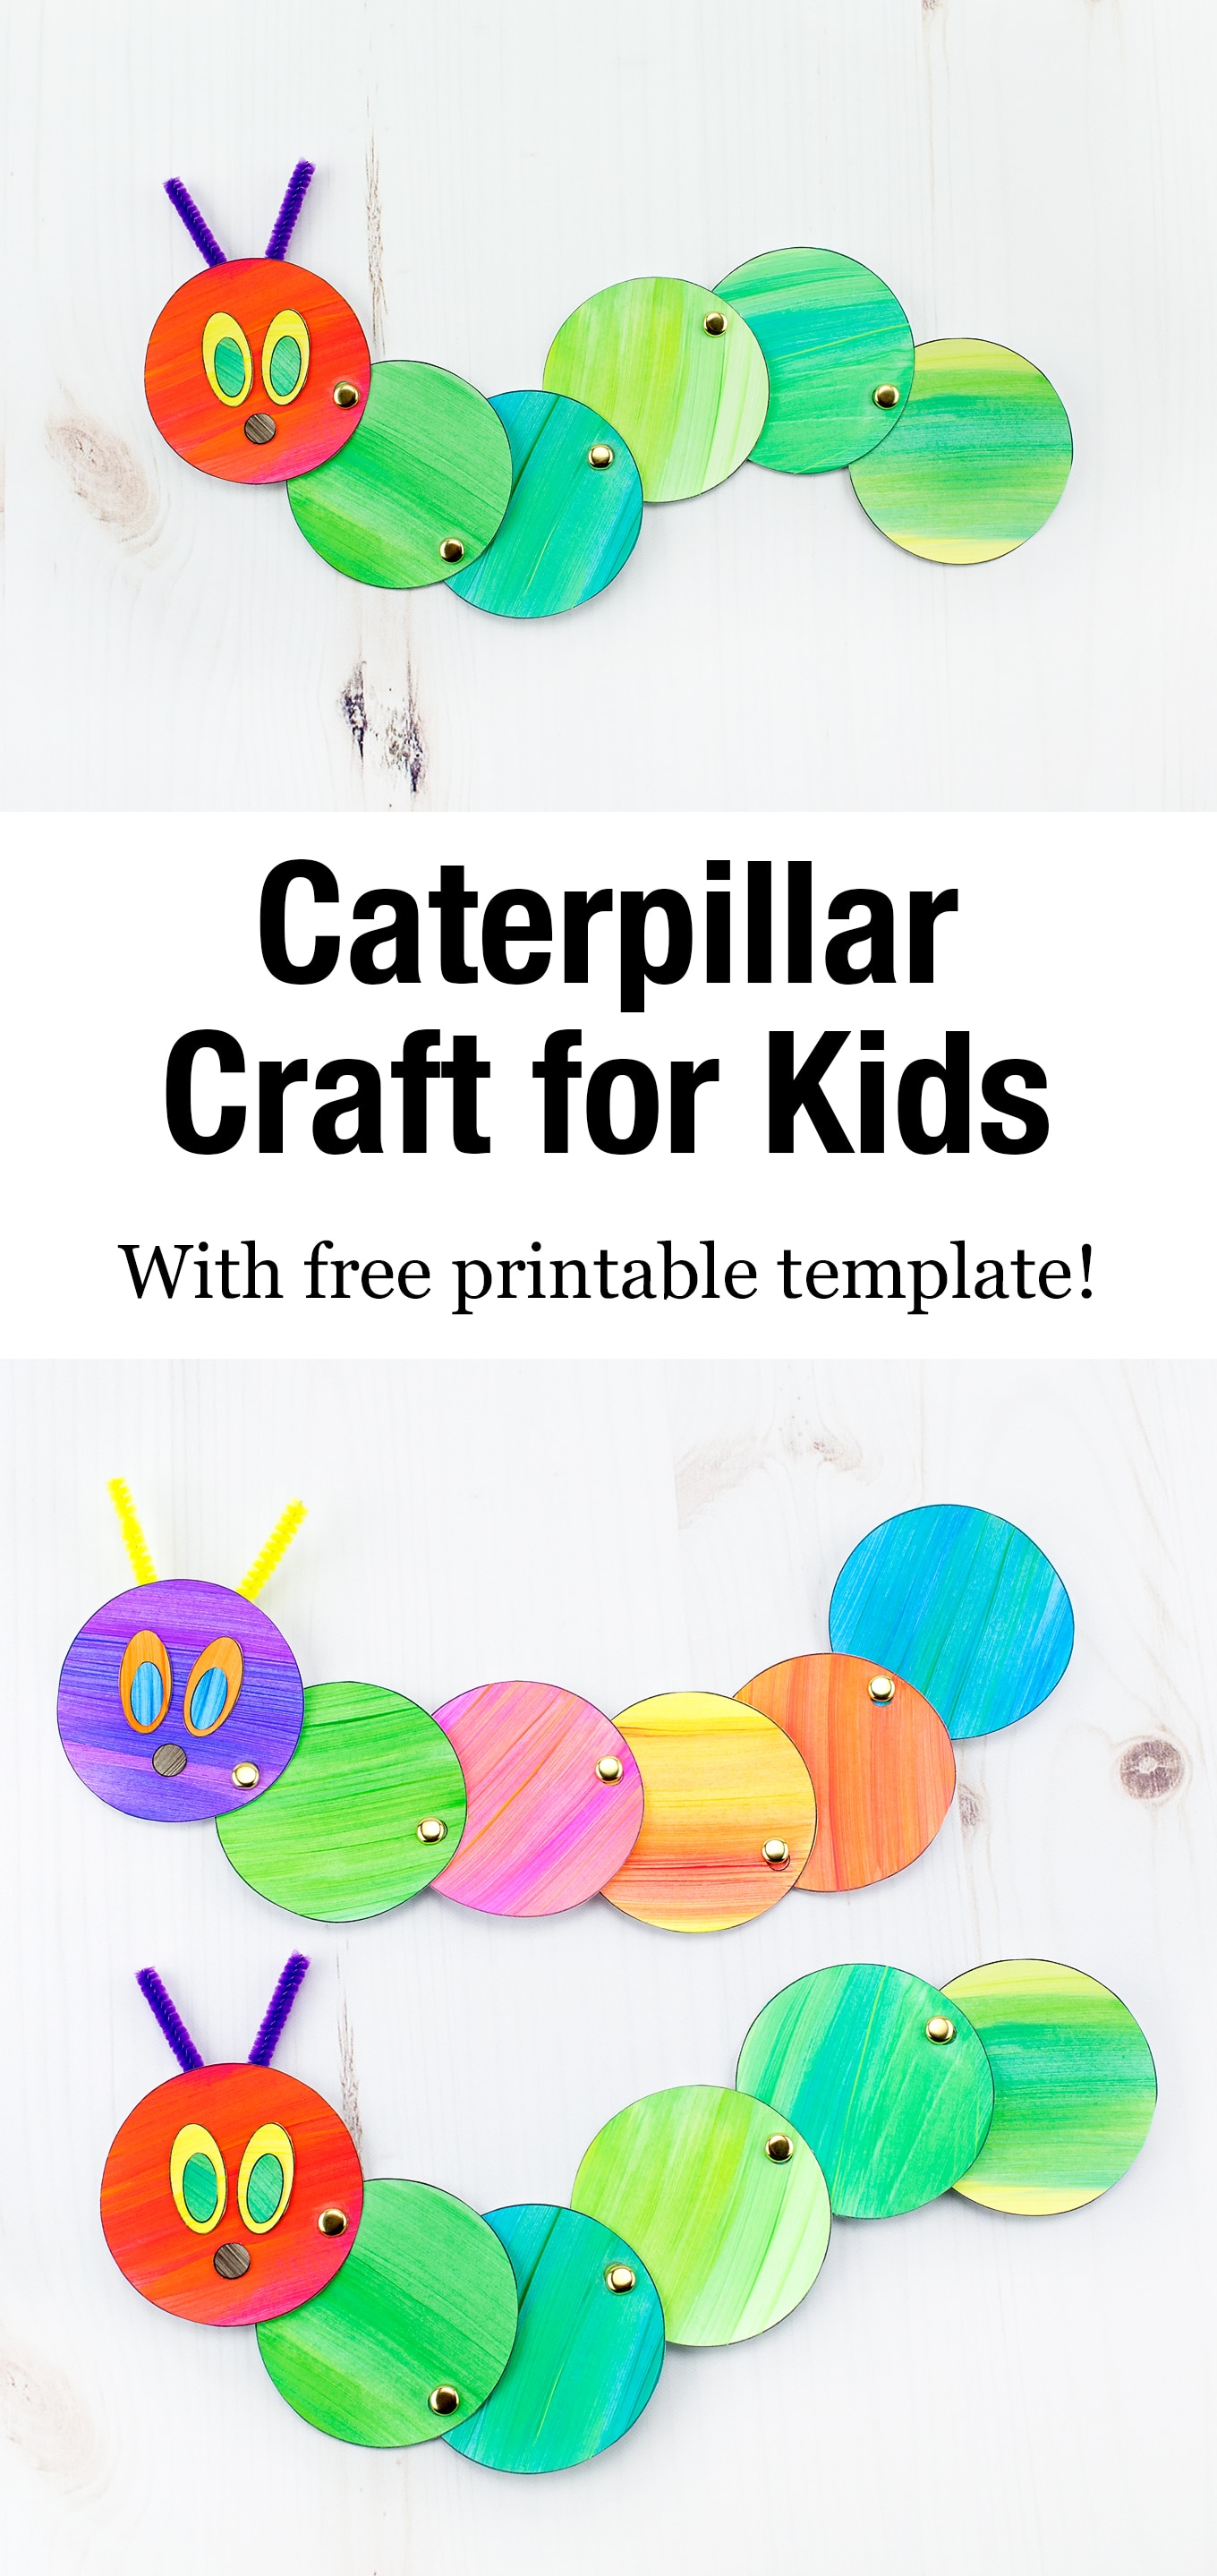 Looking for an easy and fun caterpillar craft for kids? Inspired by The Very Hungry Caterpillar, our simple caterpillar craft includes a printable template, making it perfect for home or school. #caterpillarcraft #springcraft #kidscrafts #papercrafts #veryhungrycaterpillarcrafts via @firefliesandmudpies